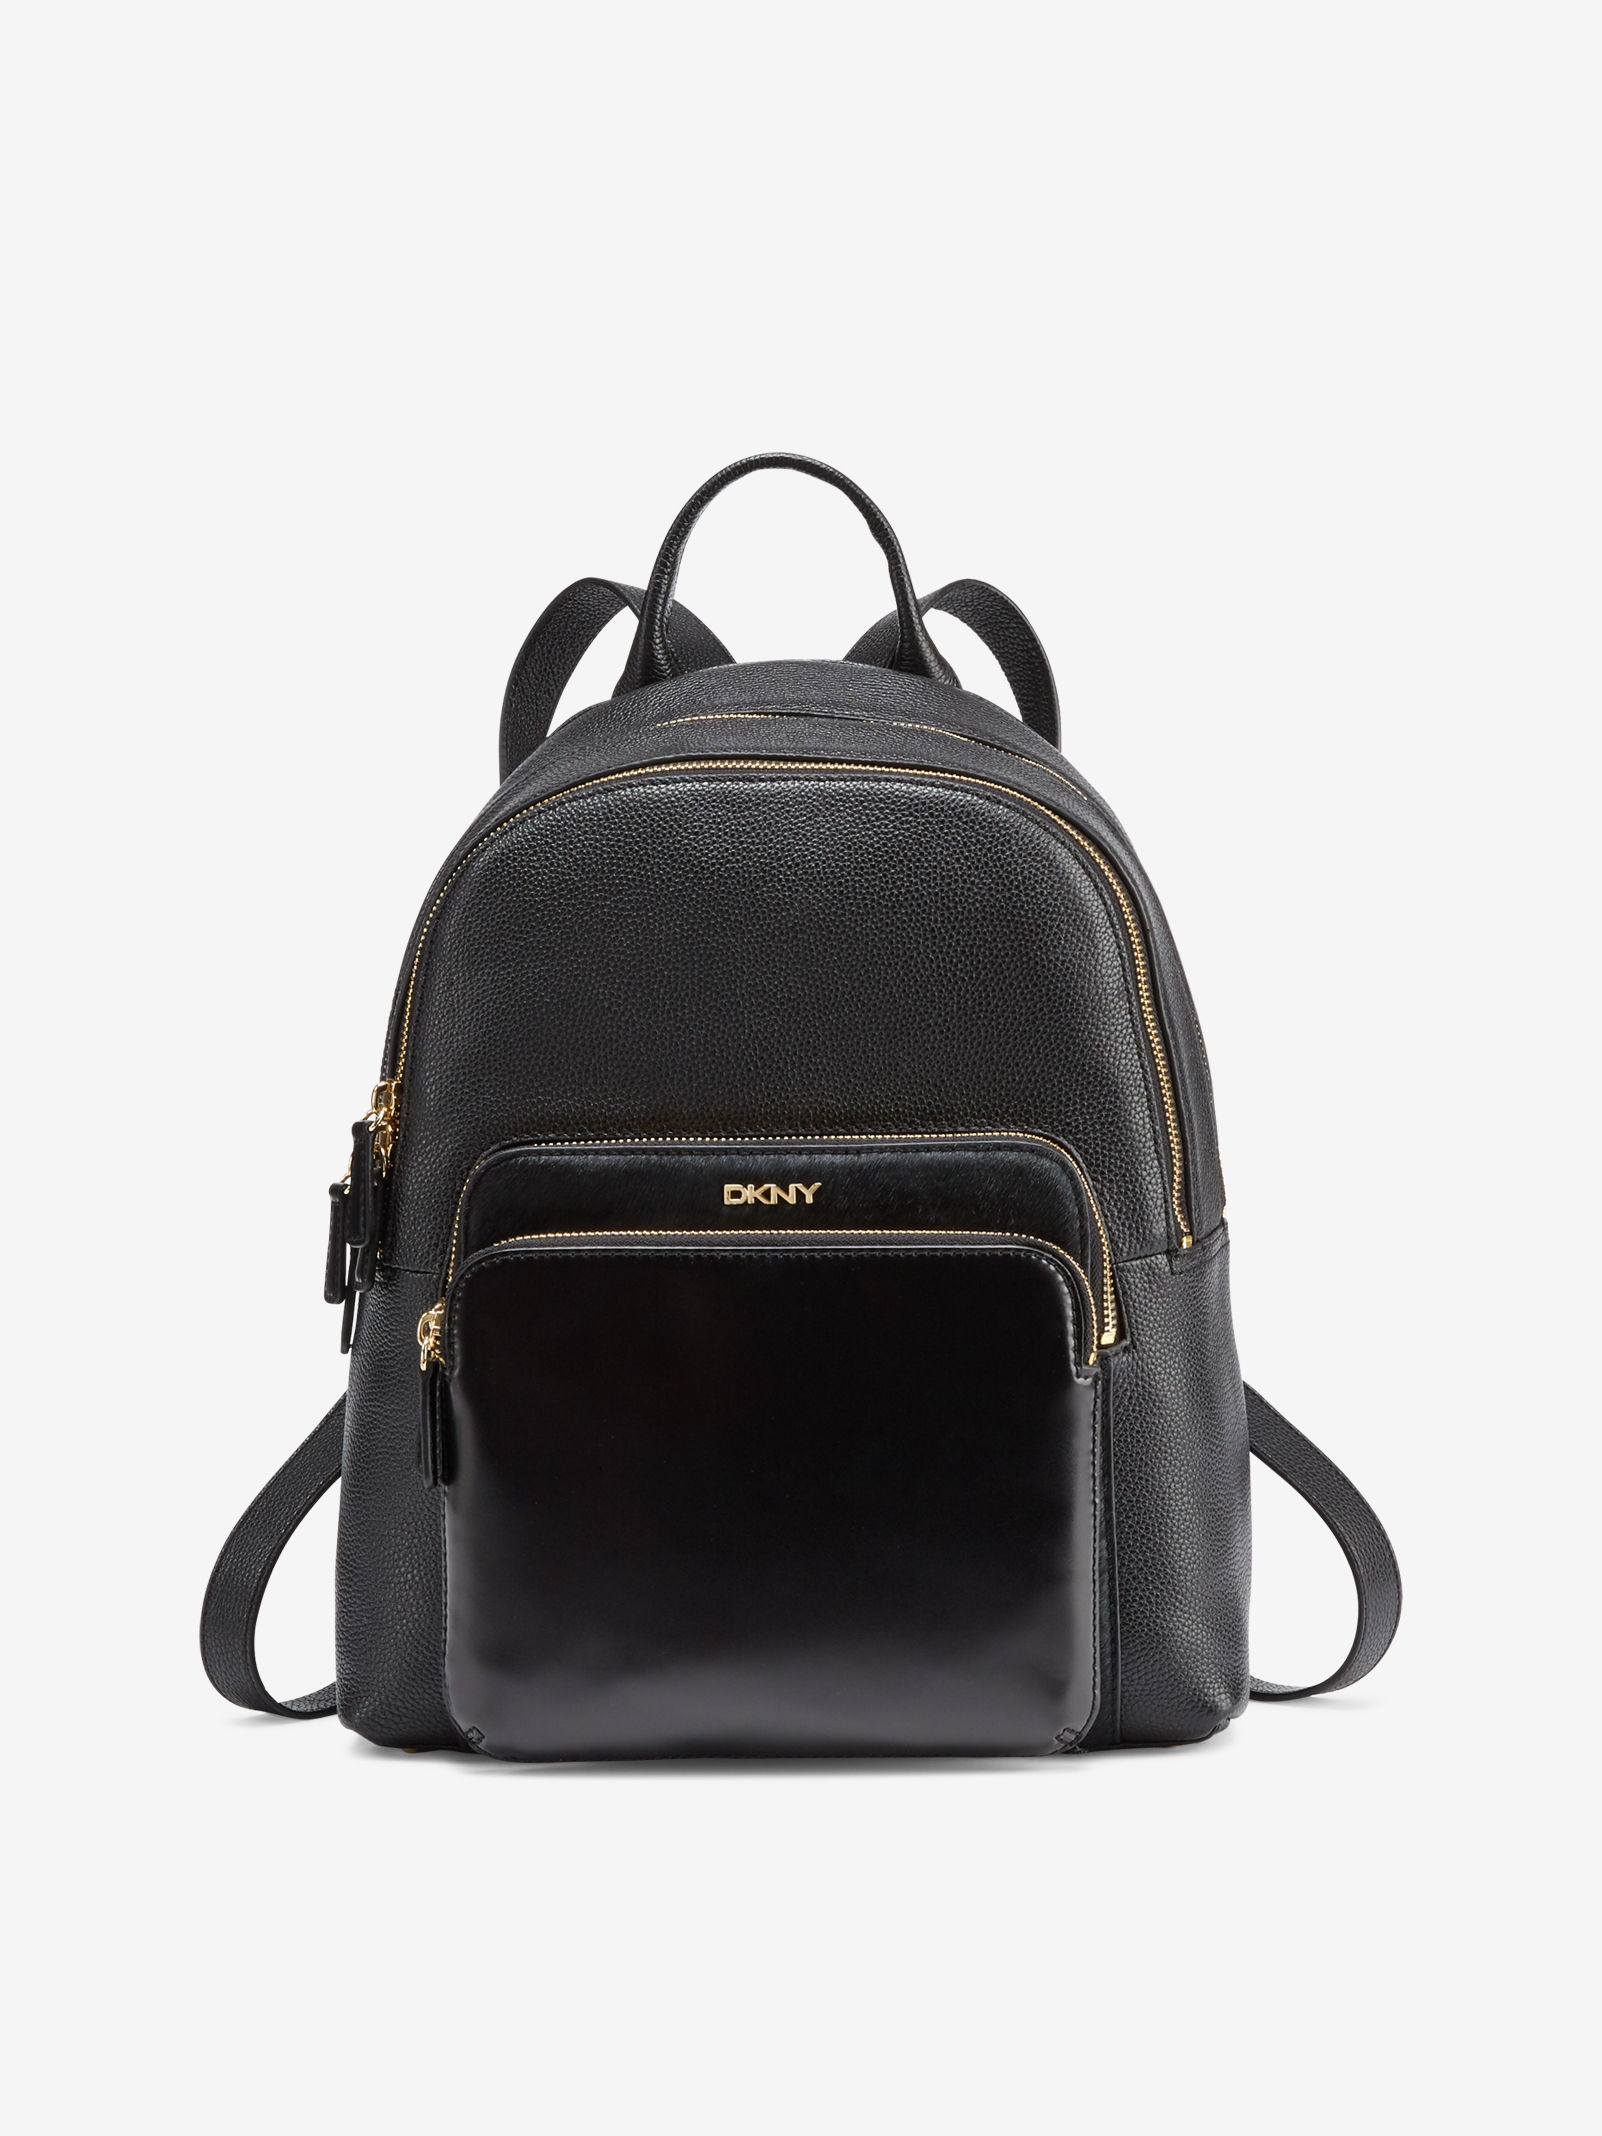 Dkny Mixed Material Backpack in Black | Lyst